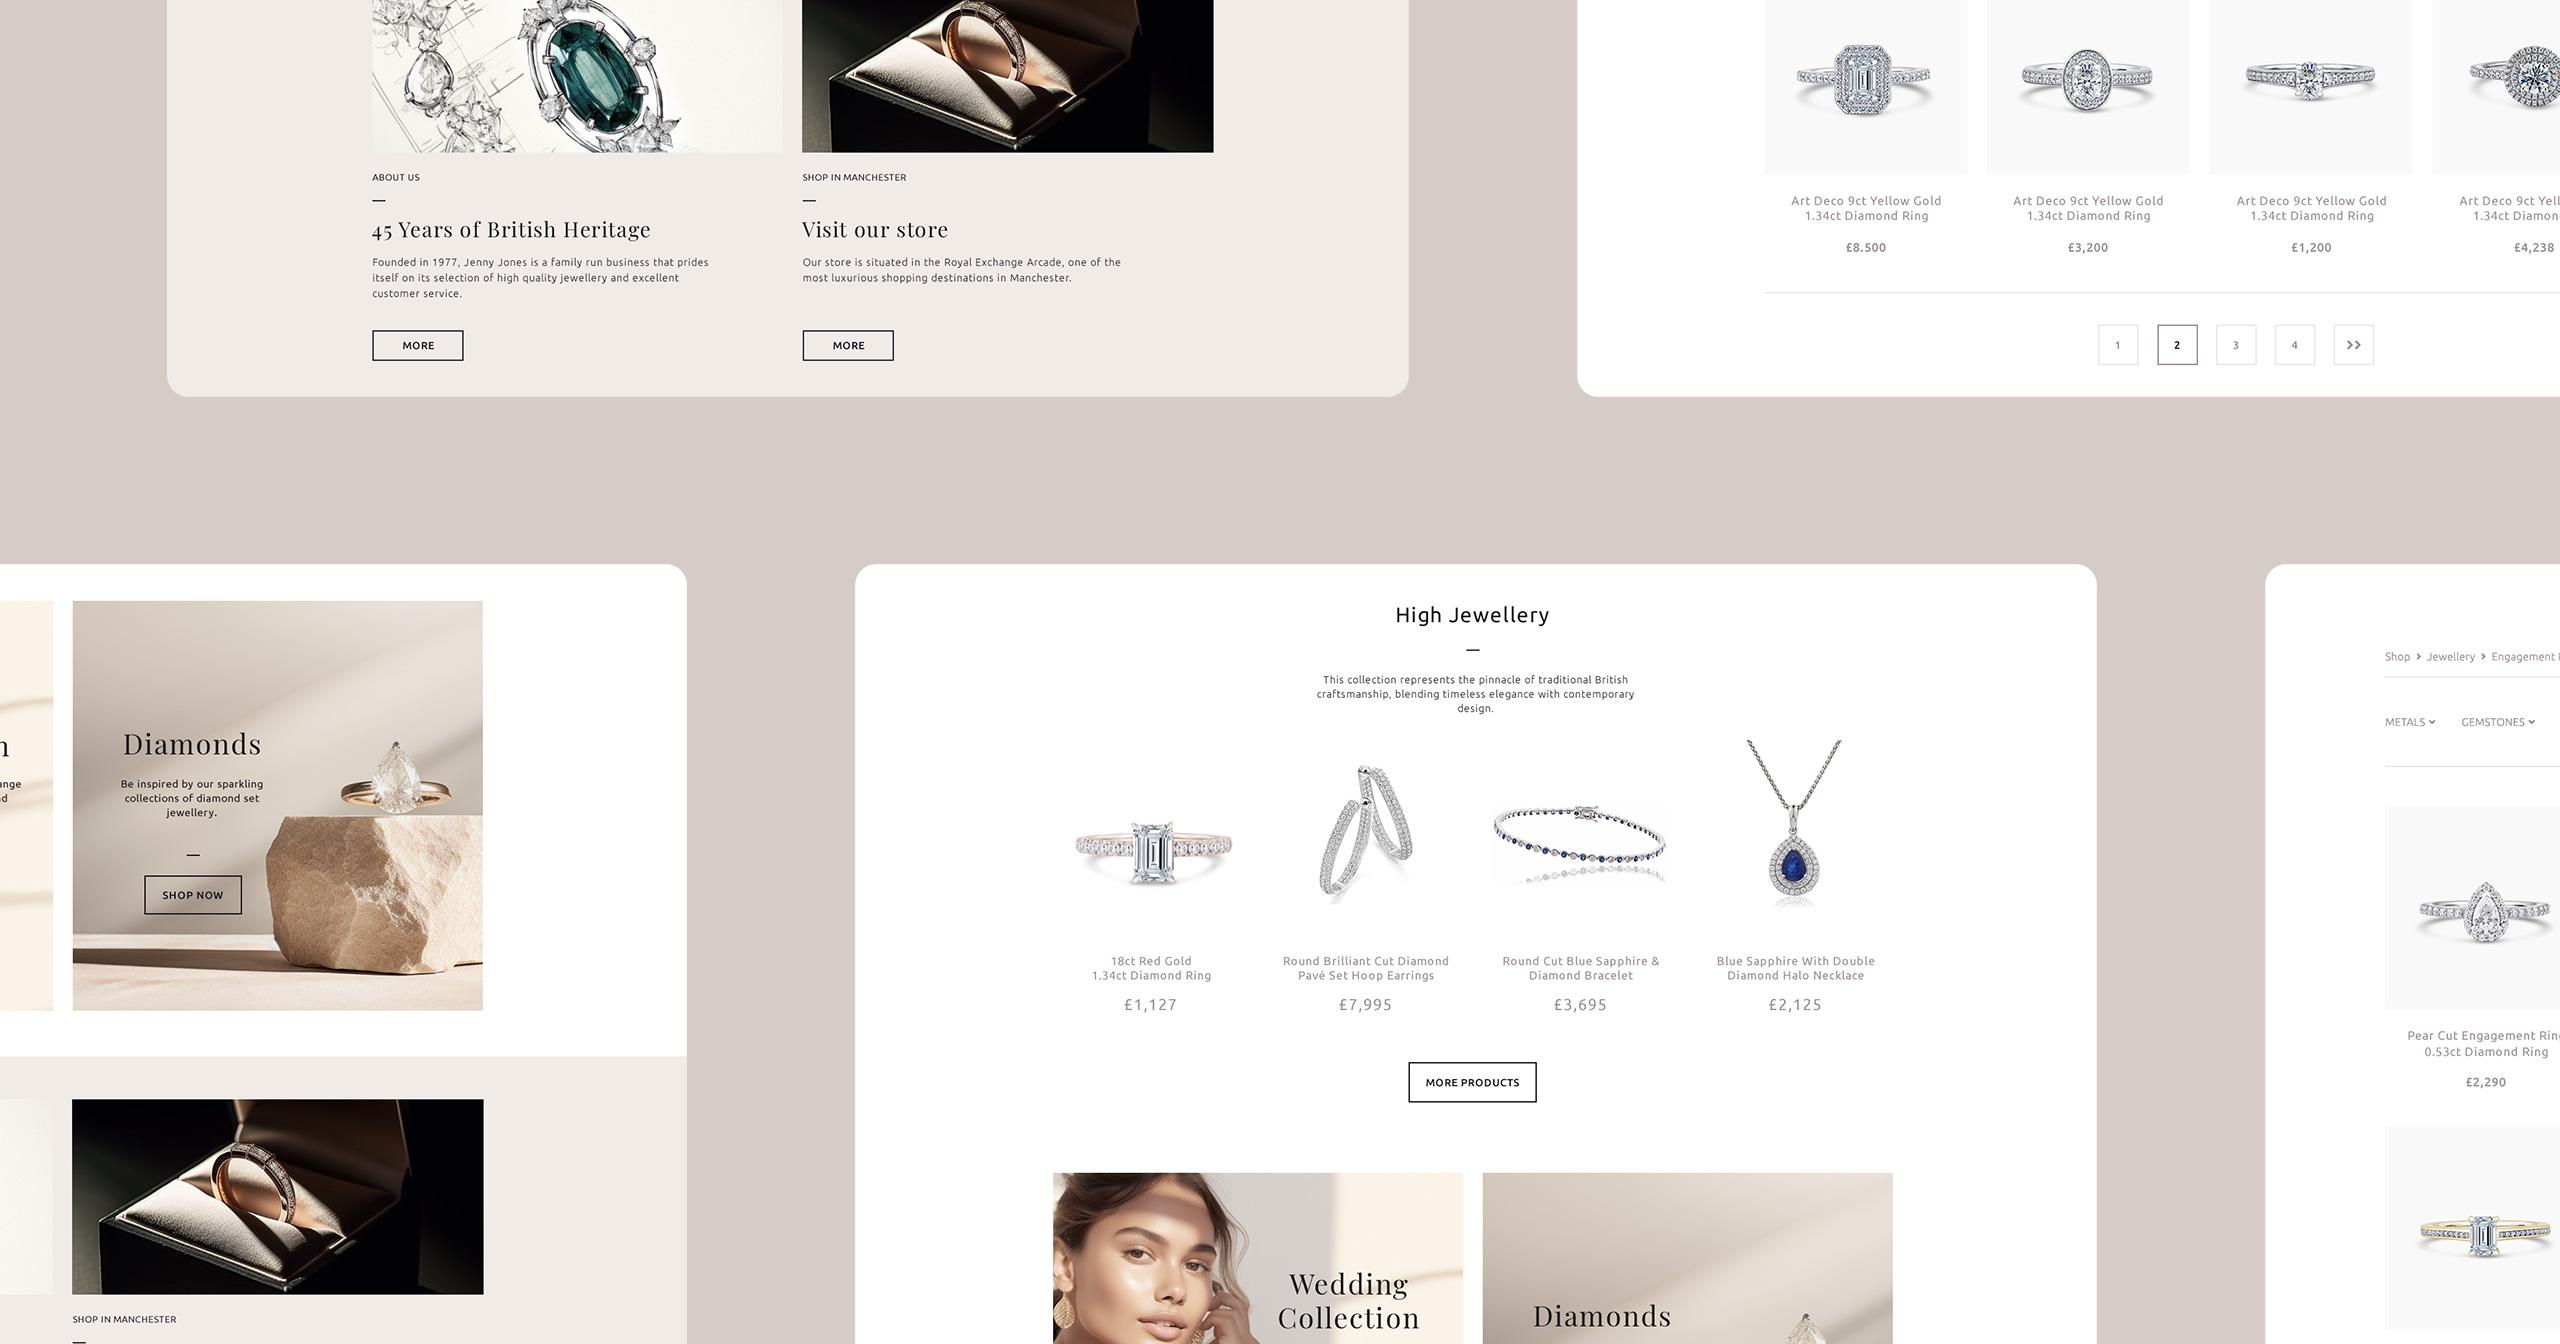 Manchester Based Jewellery Brand e-commerce website - UX/UI design, user journey and product listing